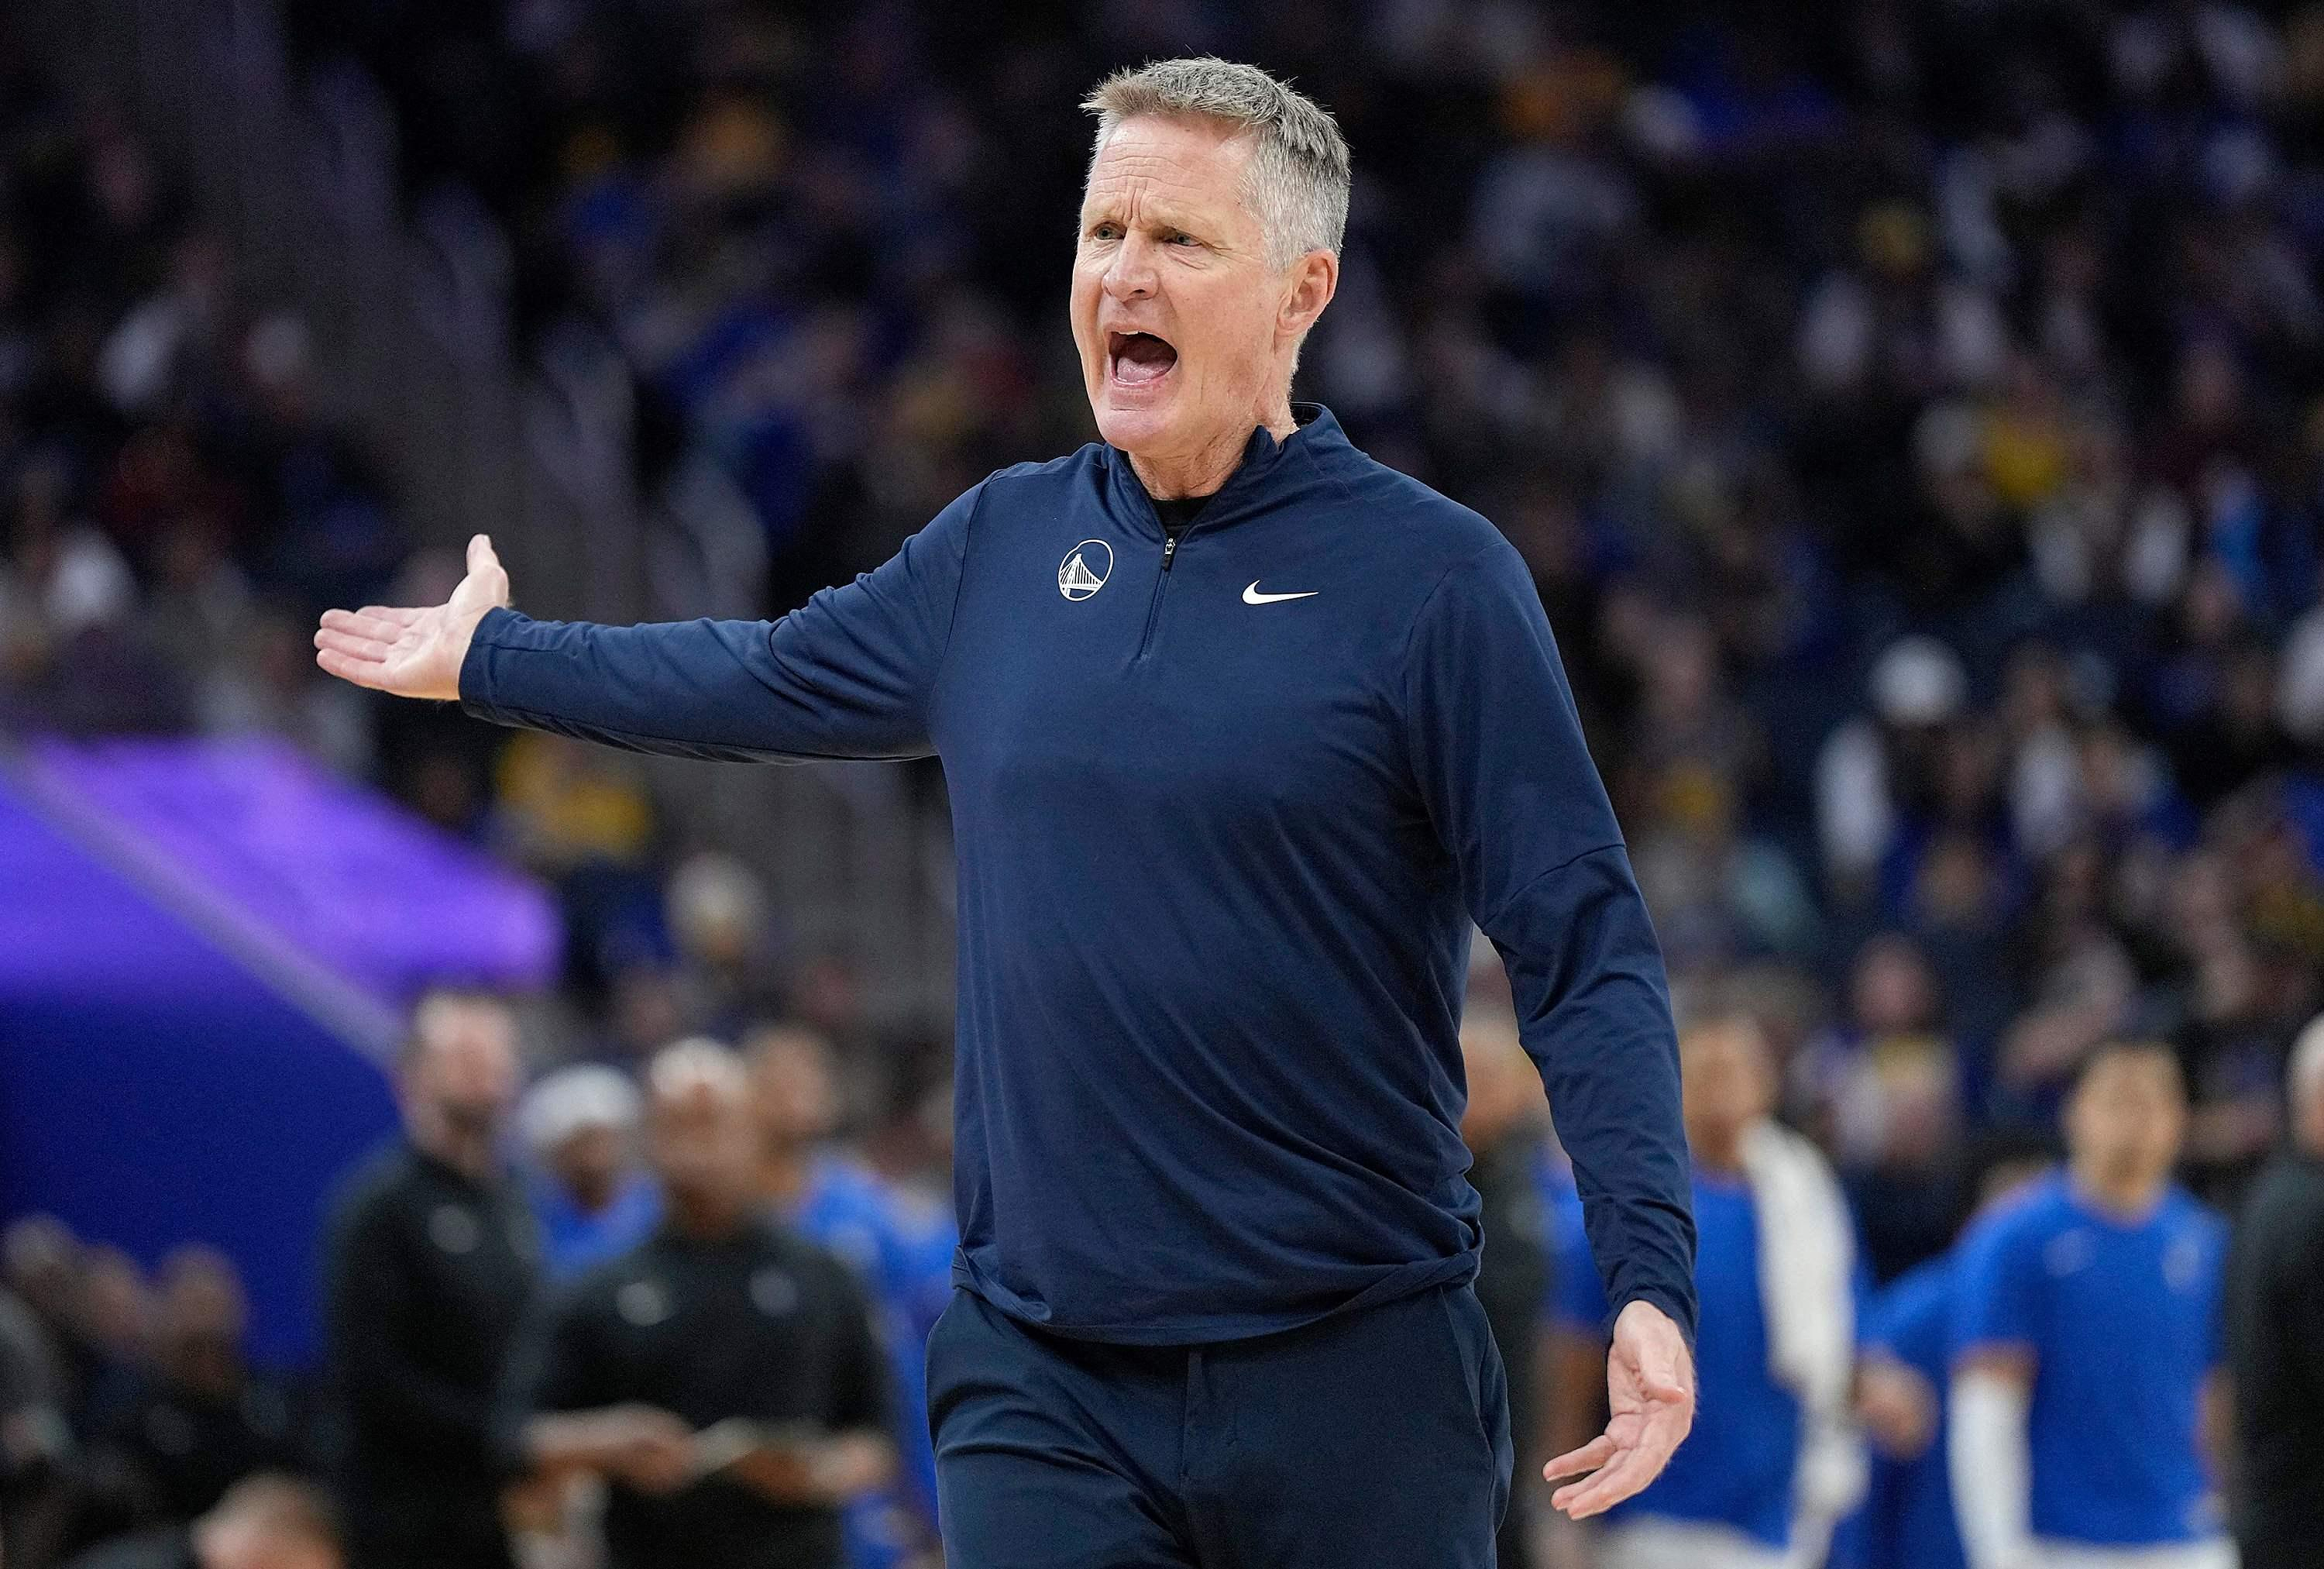 NBA: Warriors assistant coach hospitalized urgently, match between Golden State and Utah postponed